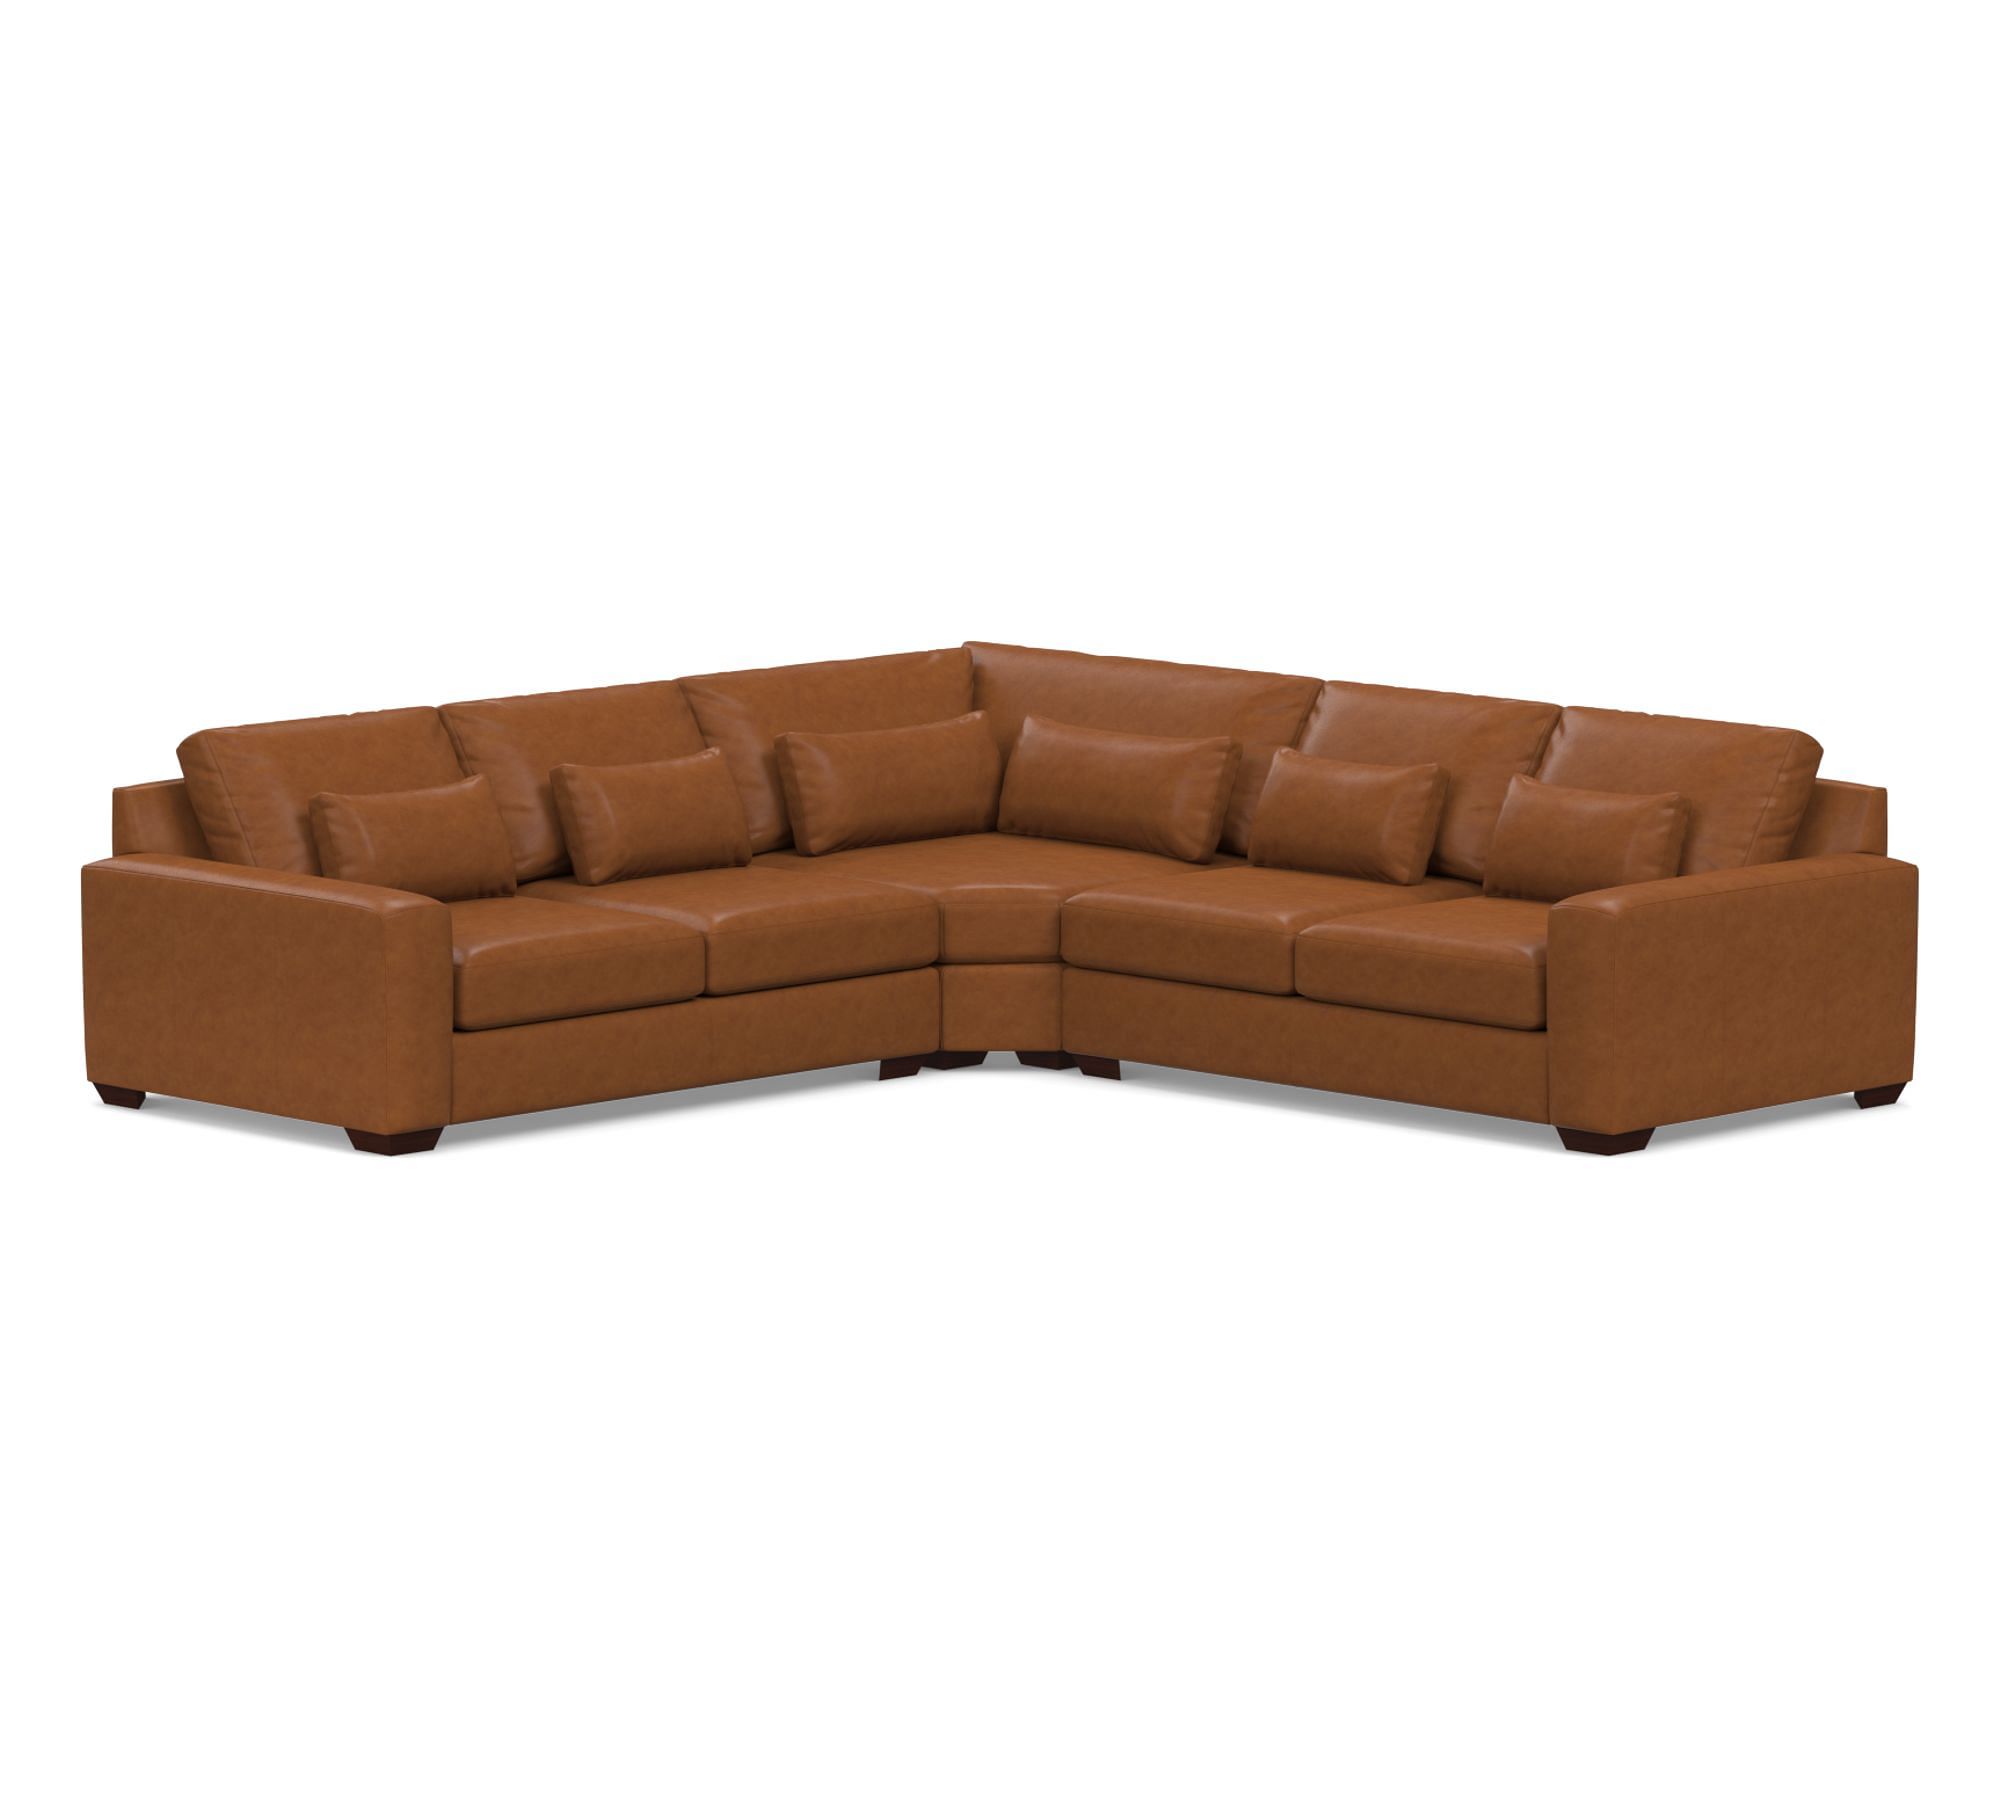 Big Sur Square Arm Deep Seat Leather 3-Piece L-Shaped Wedge Sectional (129")